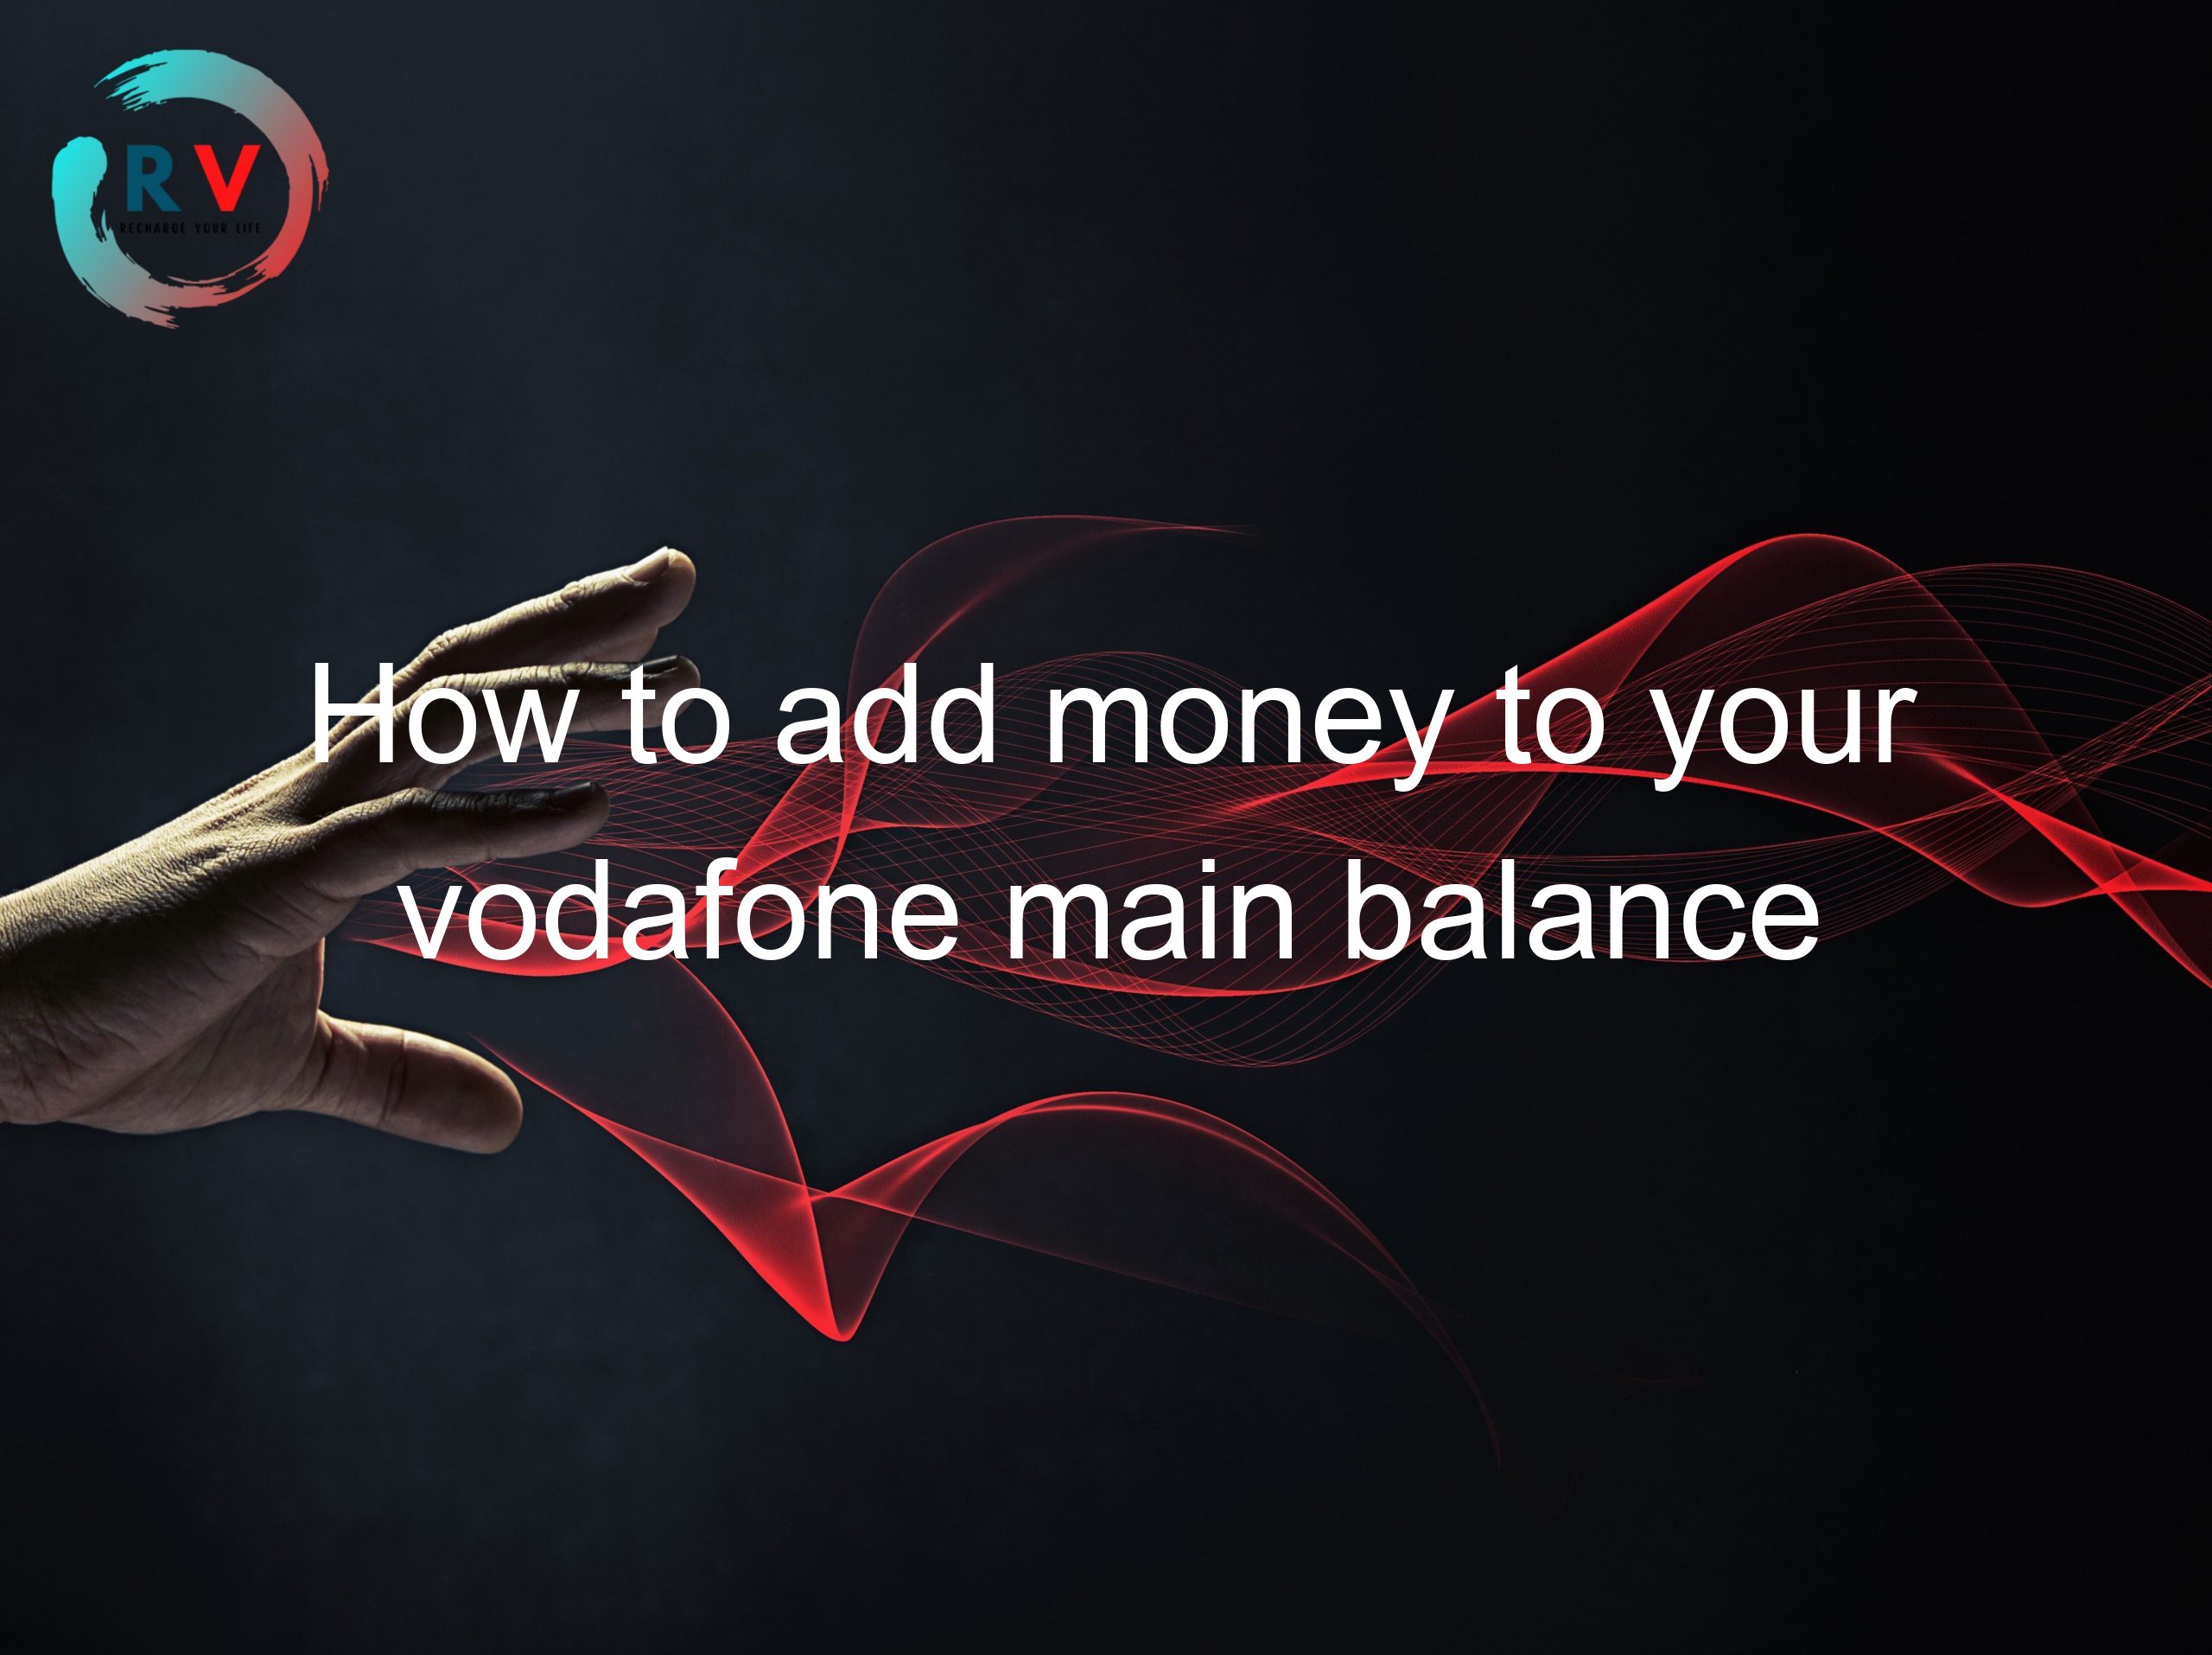 How to add money to your vodafone main balance quickly and easily